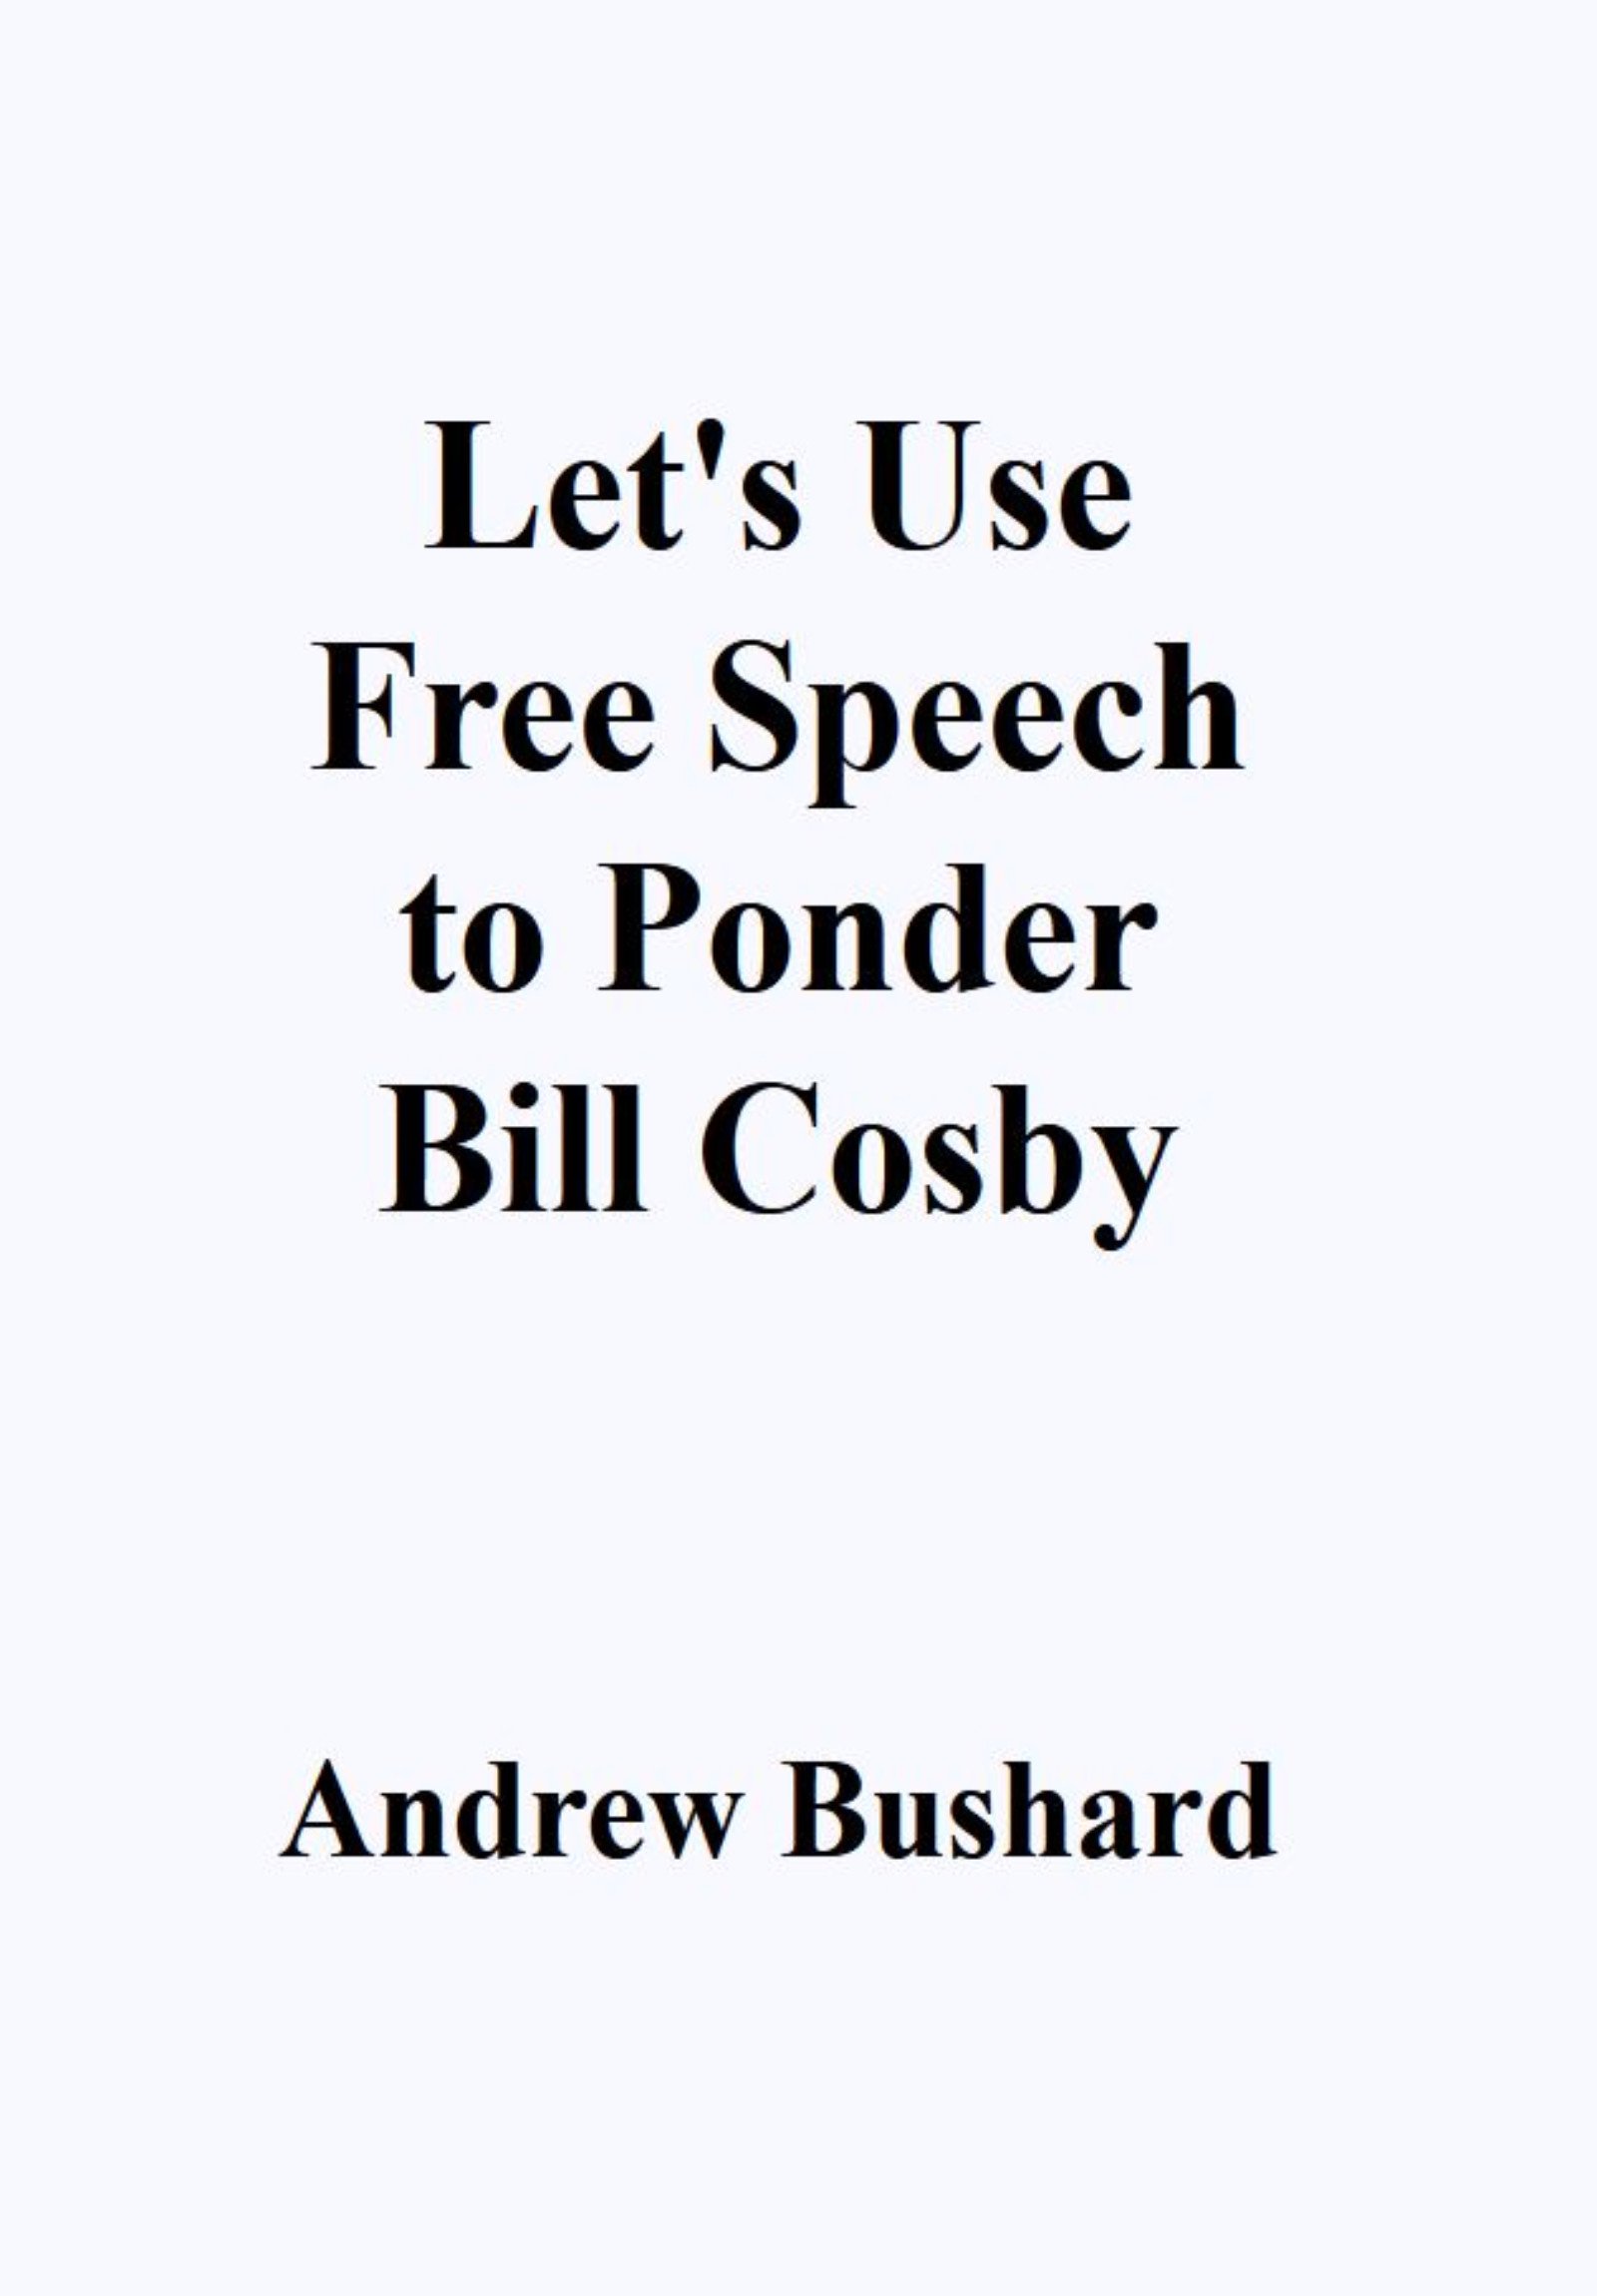 Let's Use Free Speech to Ponder Bill Cosby